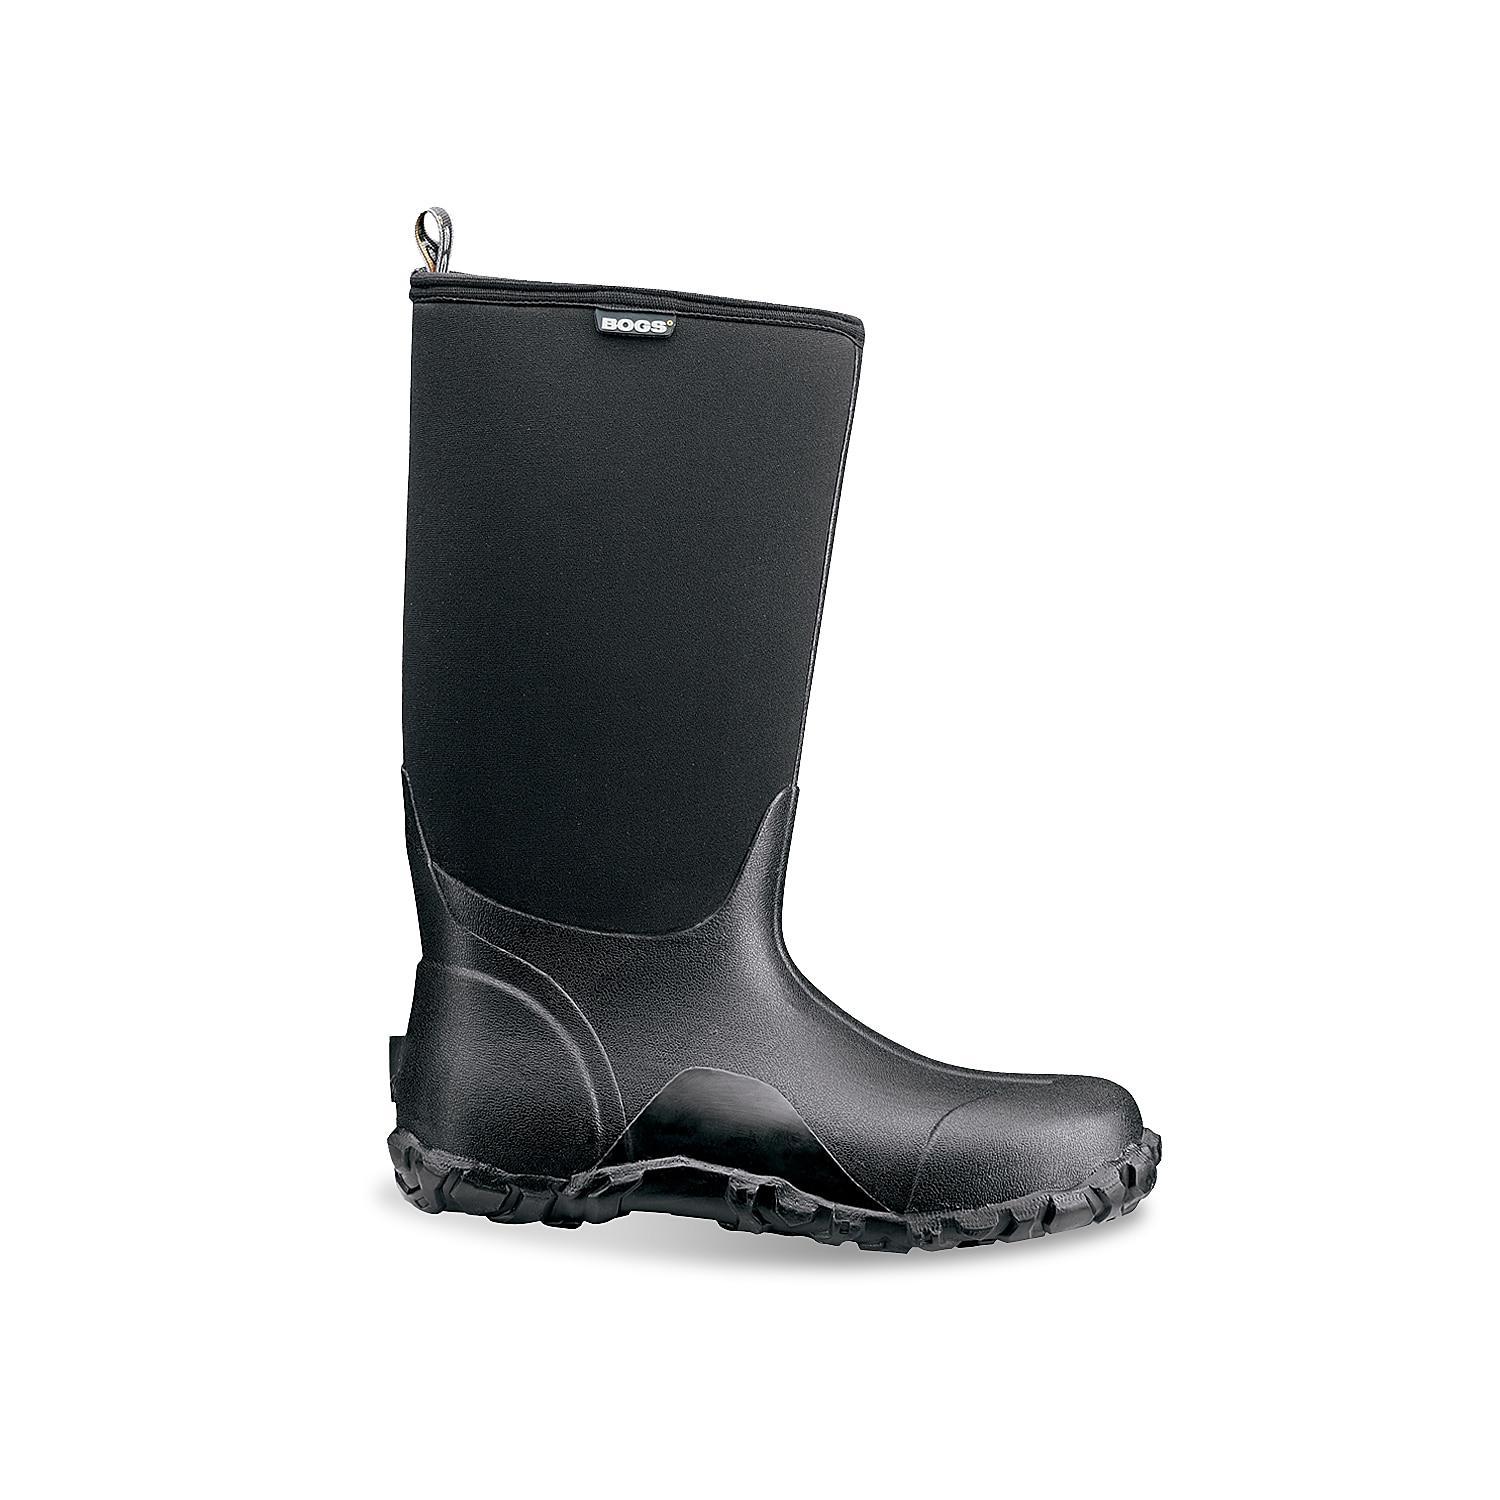 Bogs Classic High Waterproof Boot Product Image